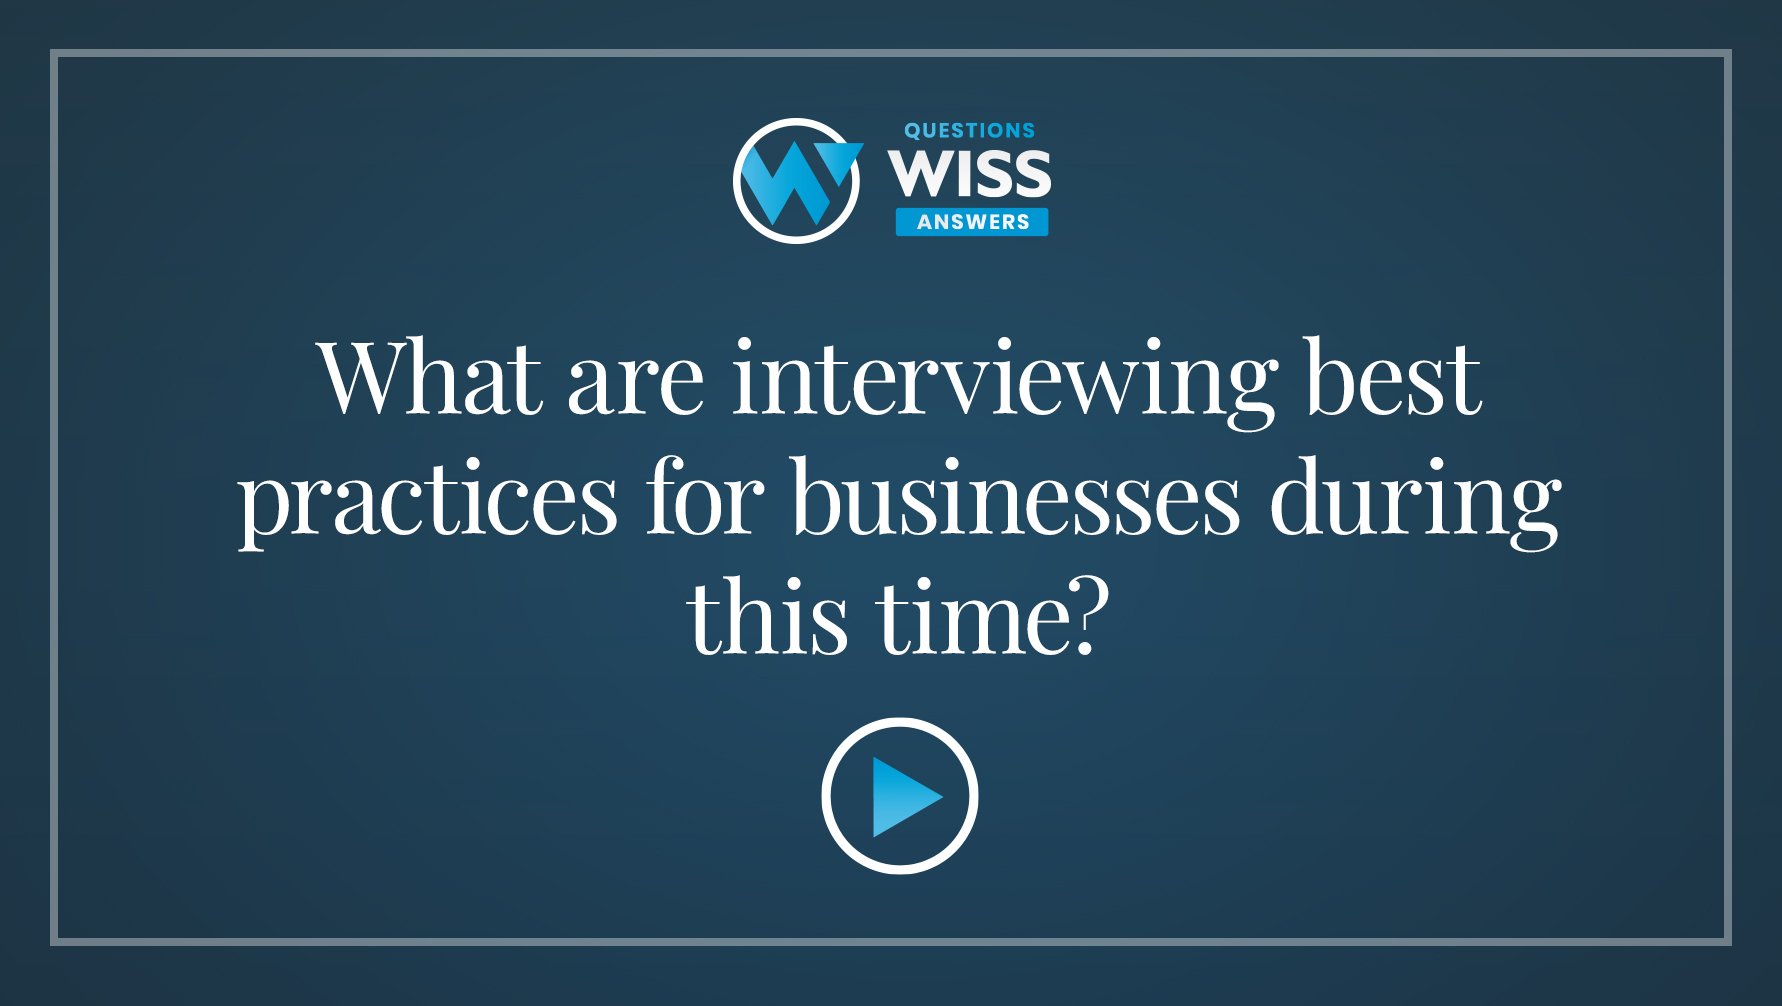 What are interviewing best practices for businesses during this time?